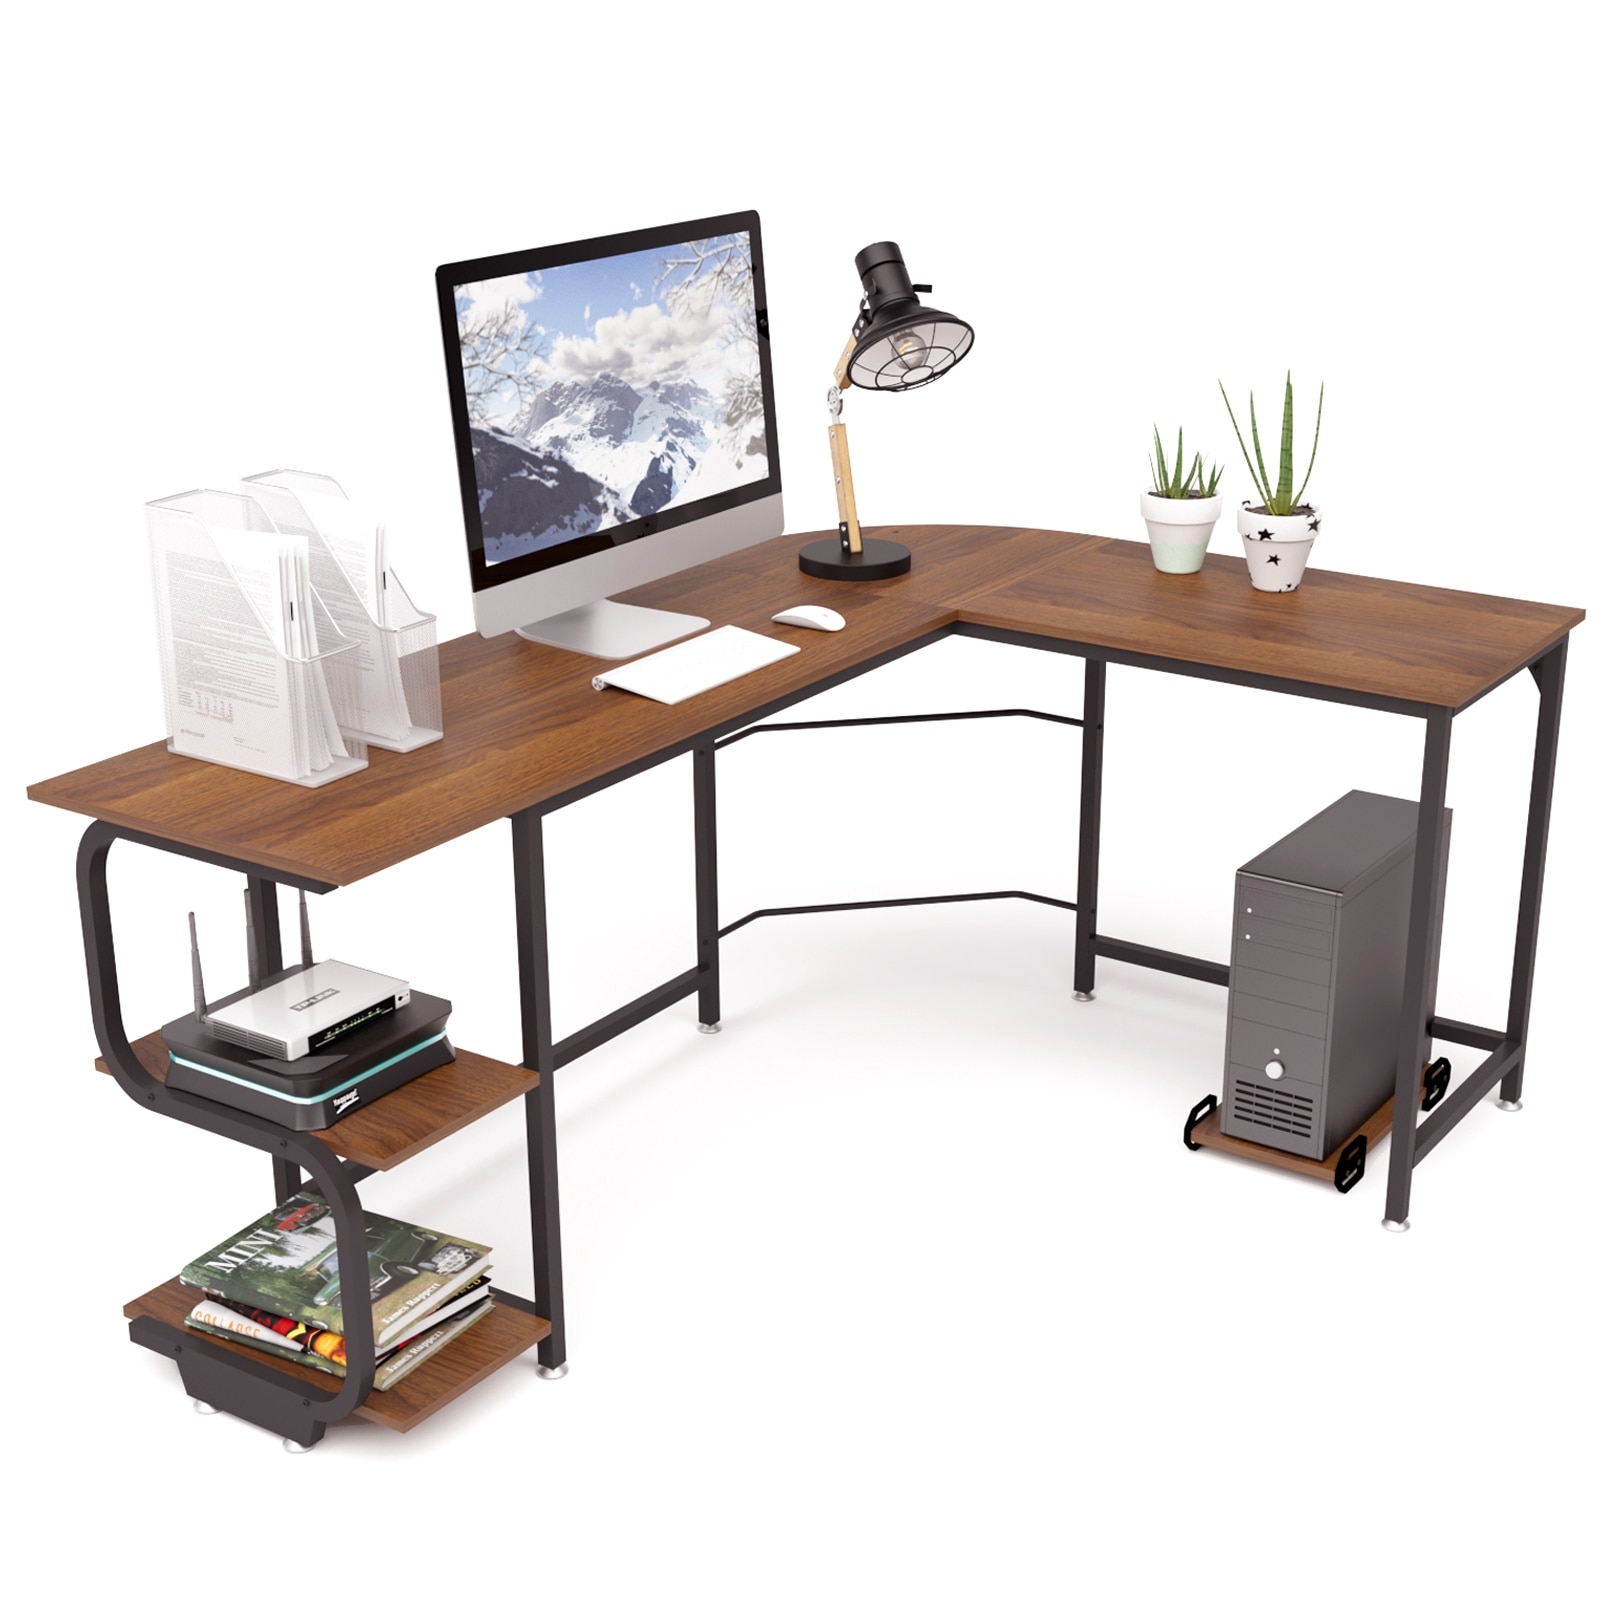 New L-Shaped Computer Desk Corner PC Laptop Gaming Table Home Office Workstation 